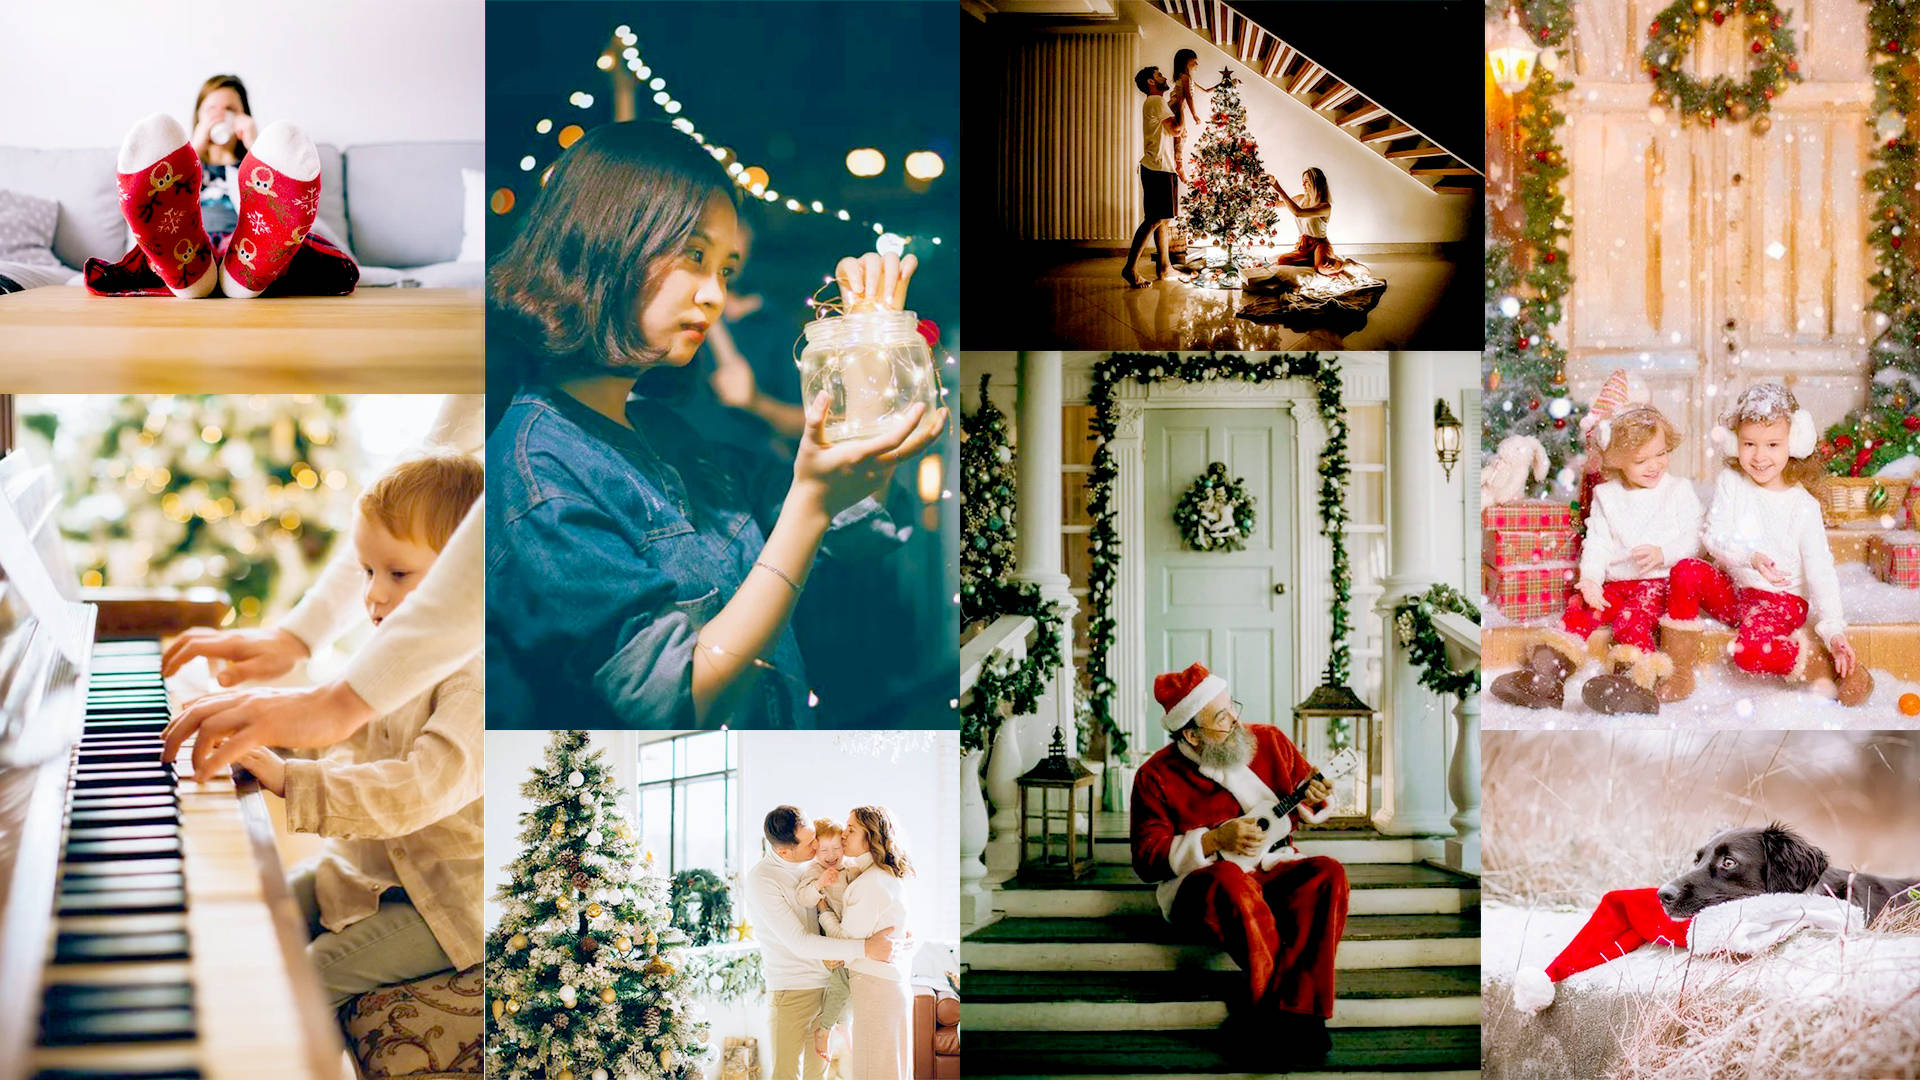 Musical Christmas Collage Wallpaper